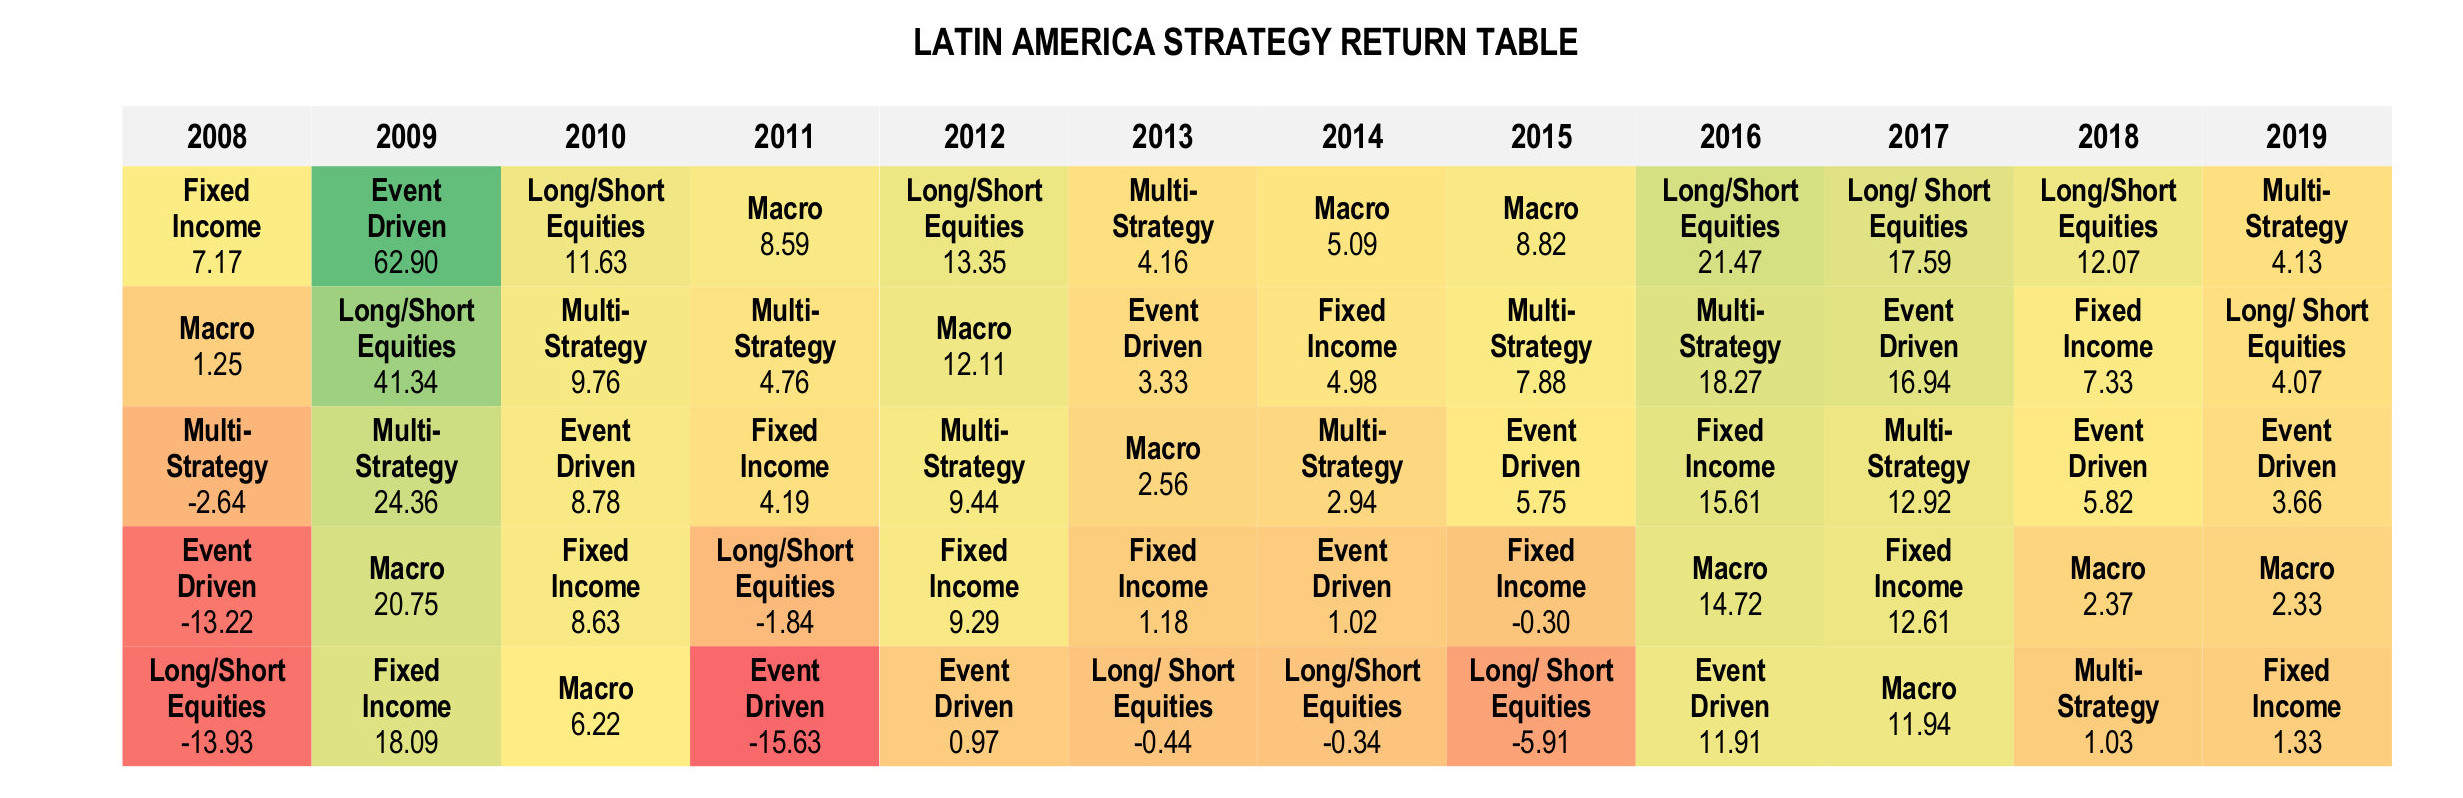 Latin American Hedge Funds Infographic May 2019 - Strategy Return Table